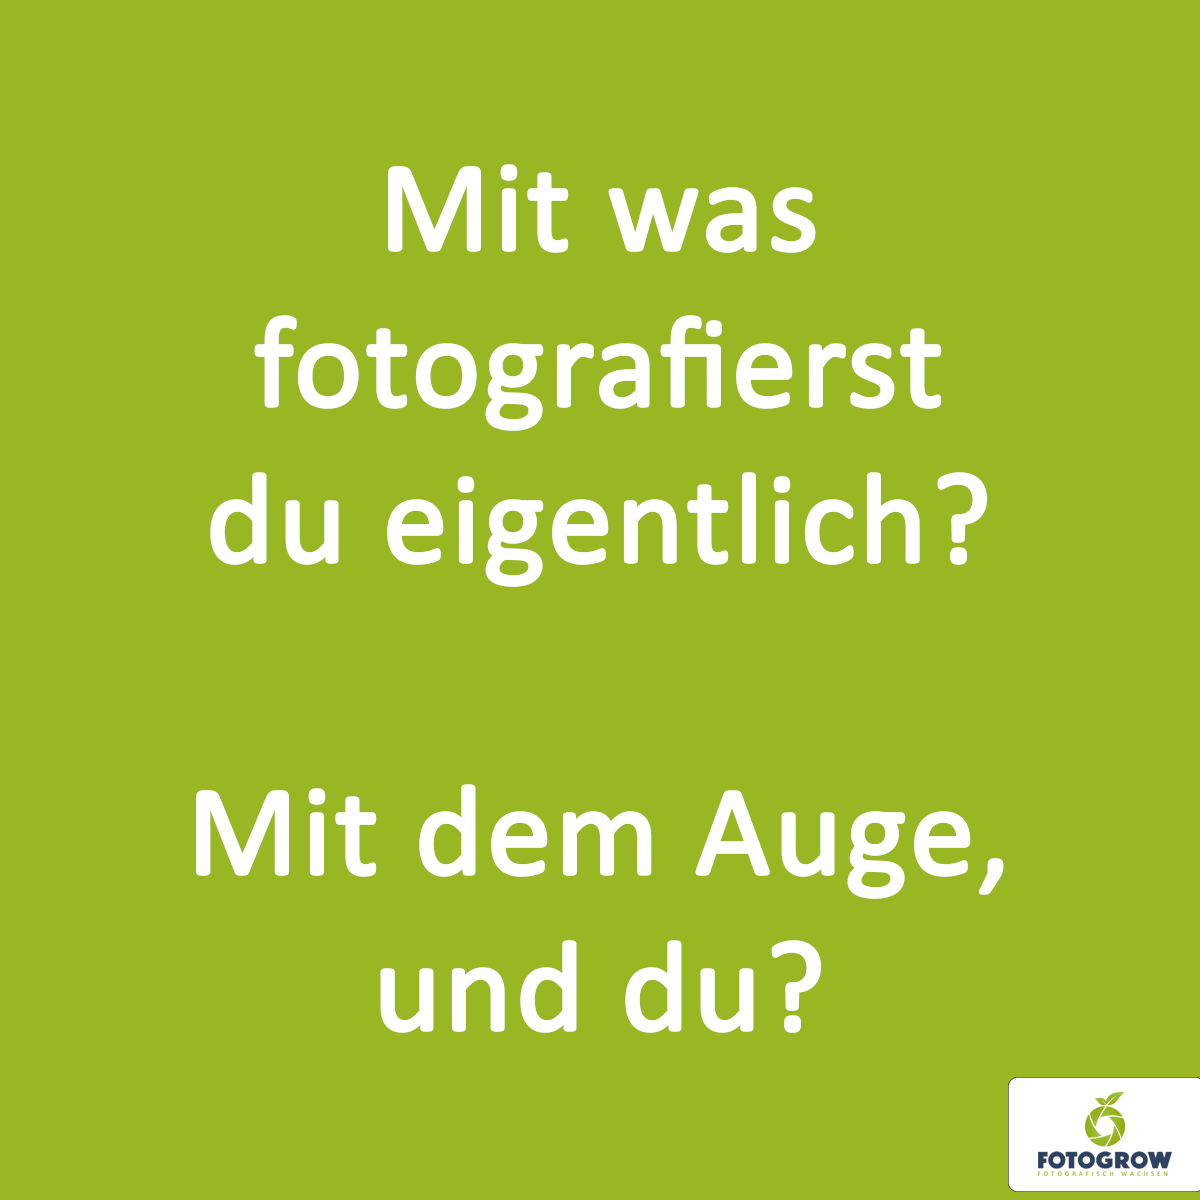 You are currently viewing Die „Mit was fotografierst du“ Frage